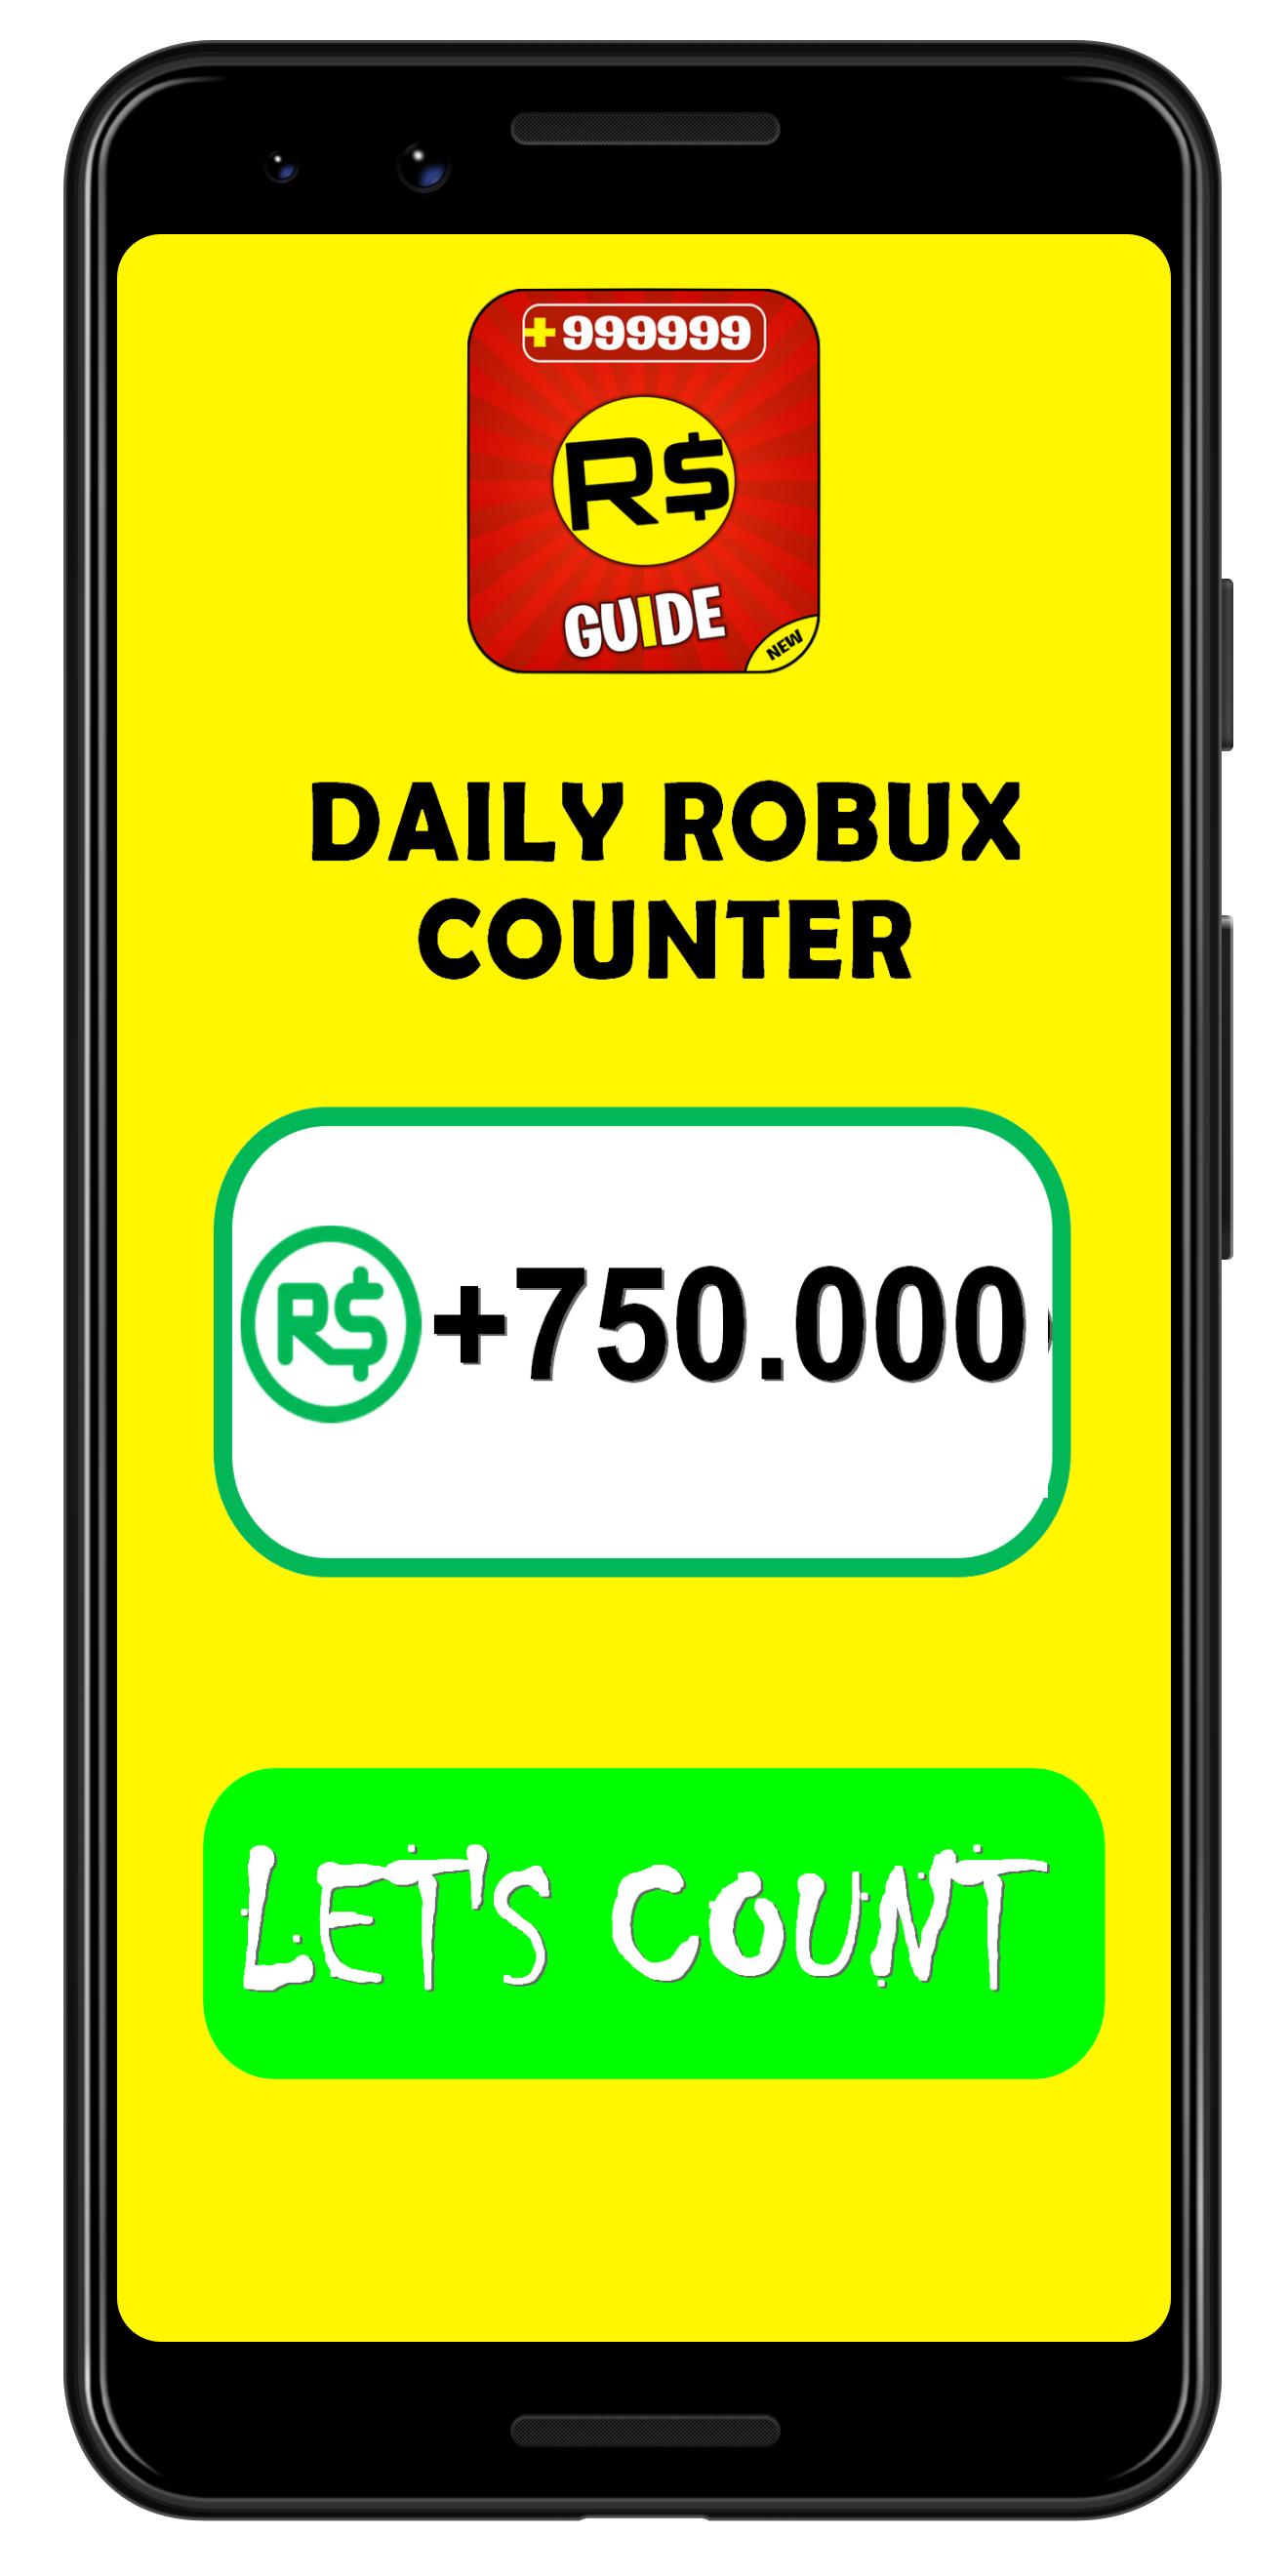 Free Robux Counter Guide Tips For Rbx Game For Android Apk Download - 750 robux free